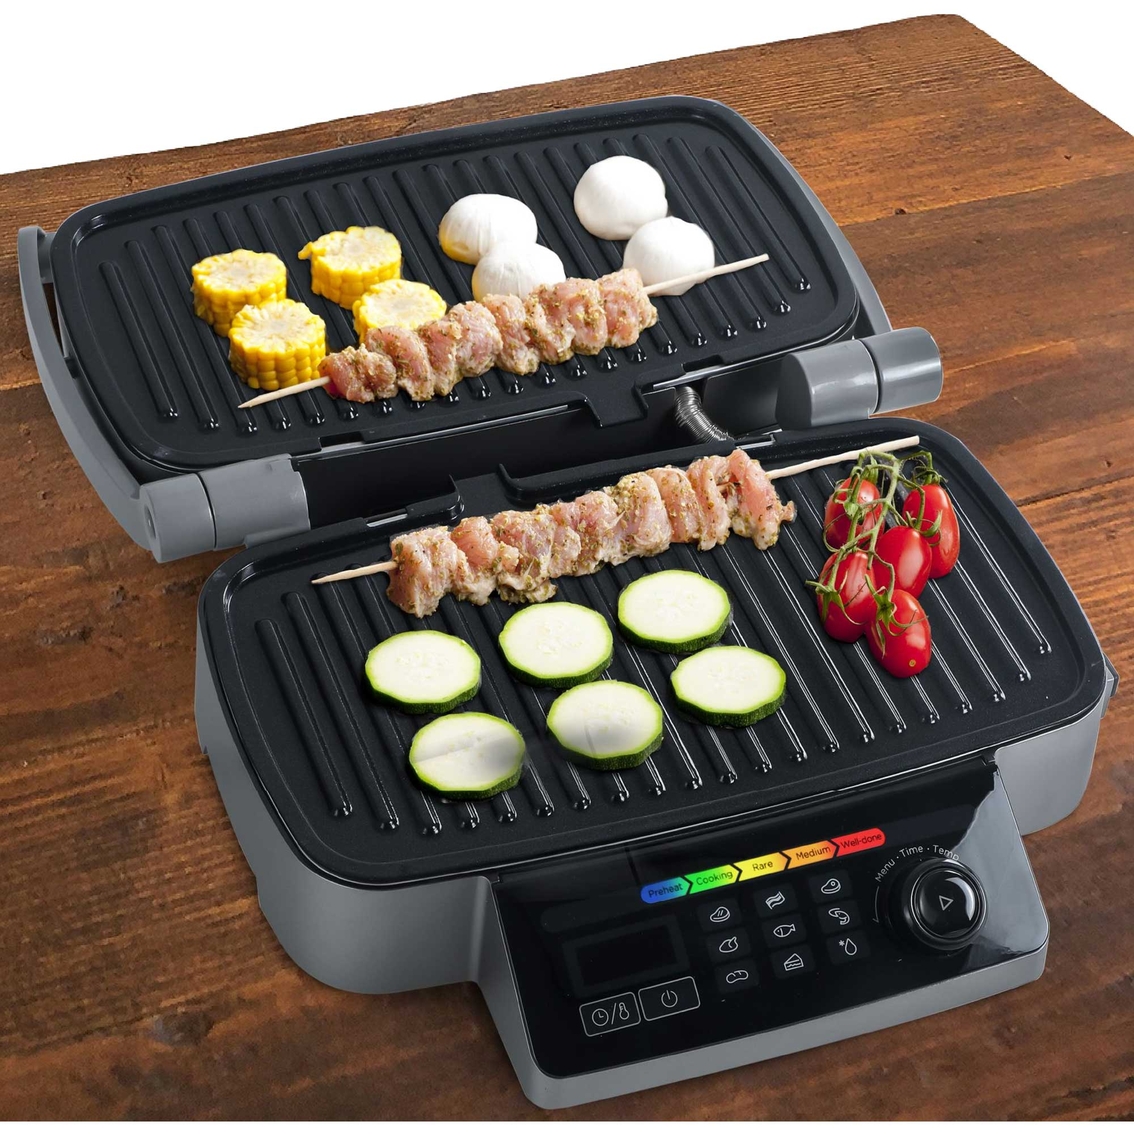 Commercial Chef 9 in 1 Contact Grill - Image 3 of 7